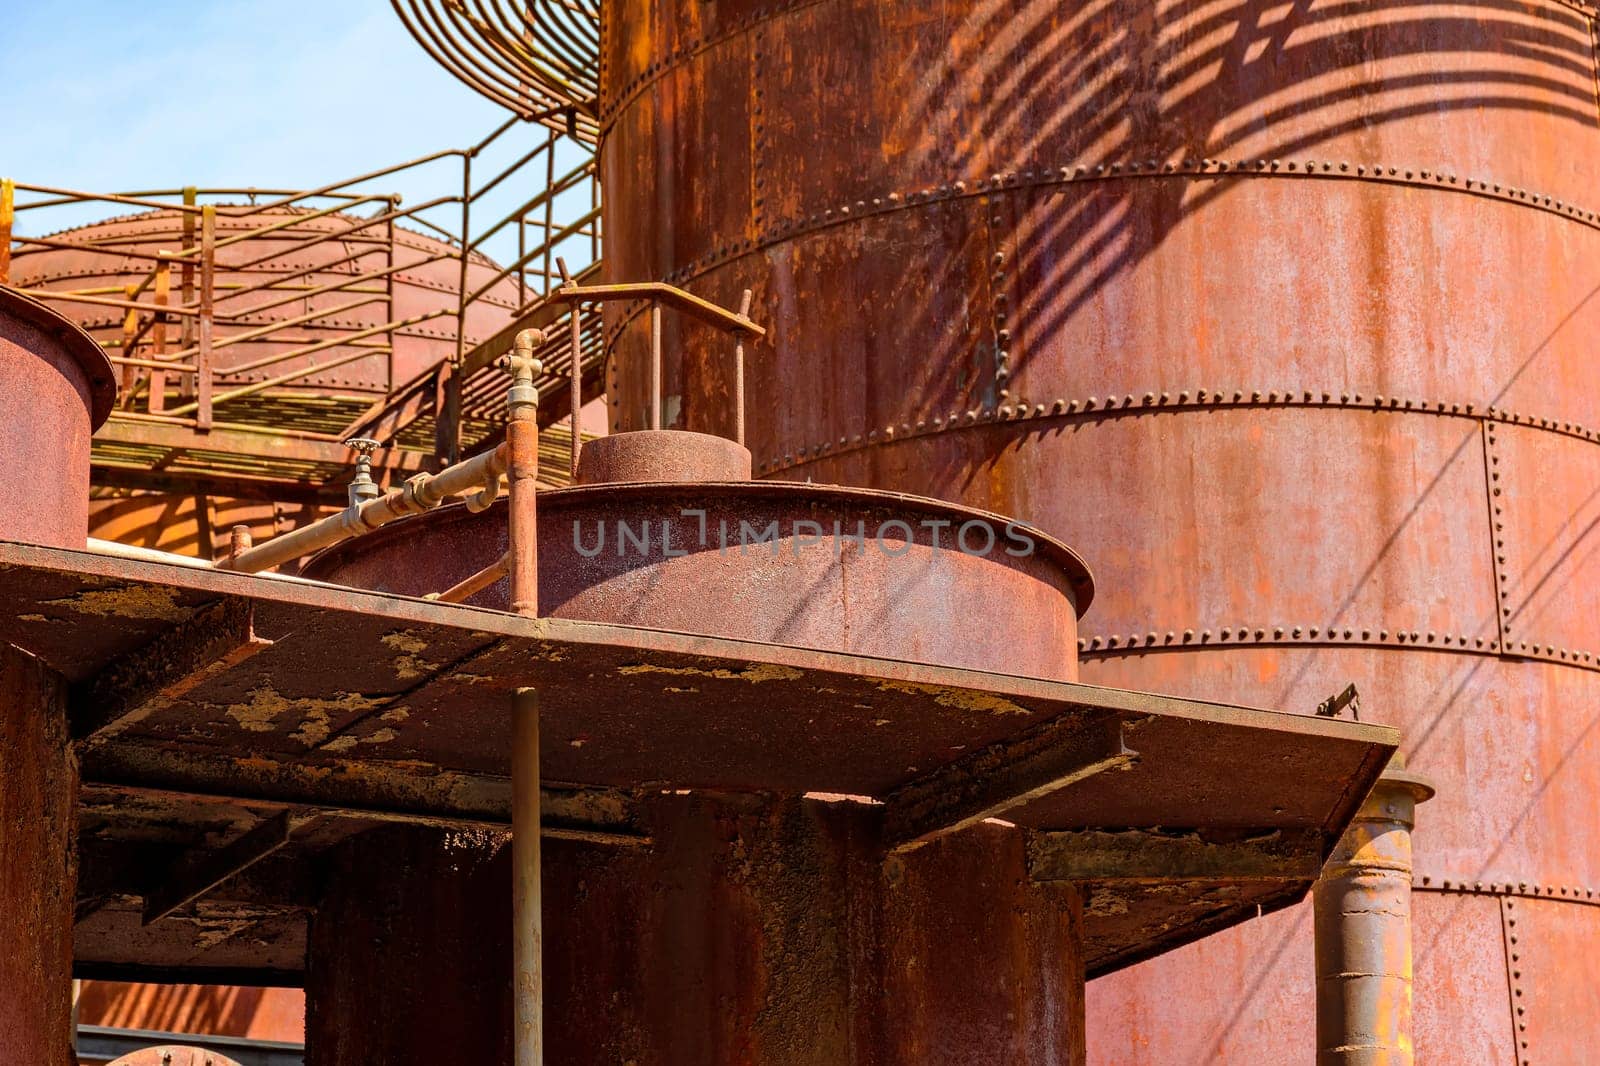 Corroded and rusty gears, tanks and pipes of old machinery for processing abandoned iron ore in Minas Gerais, Brazil